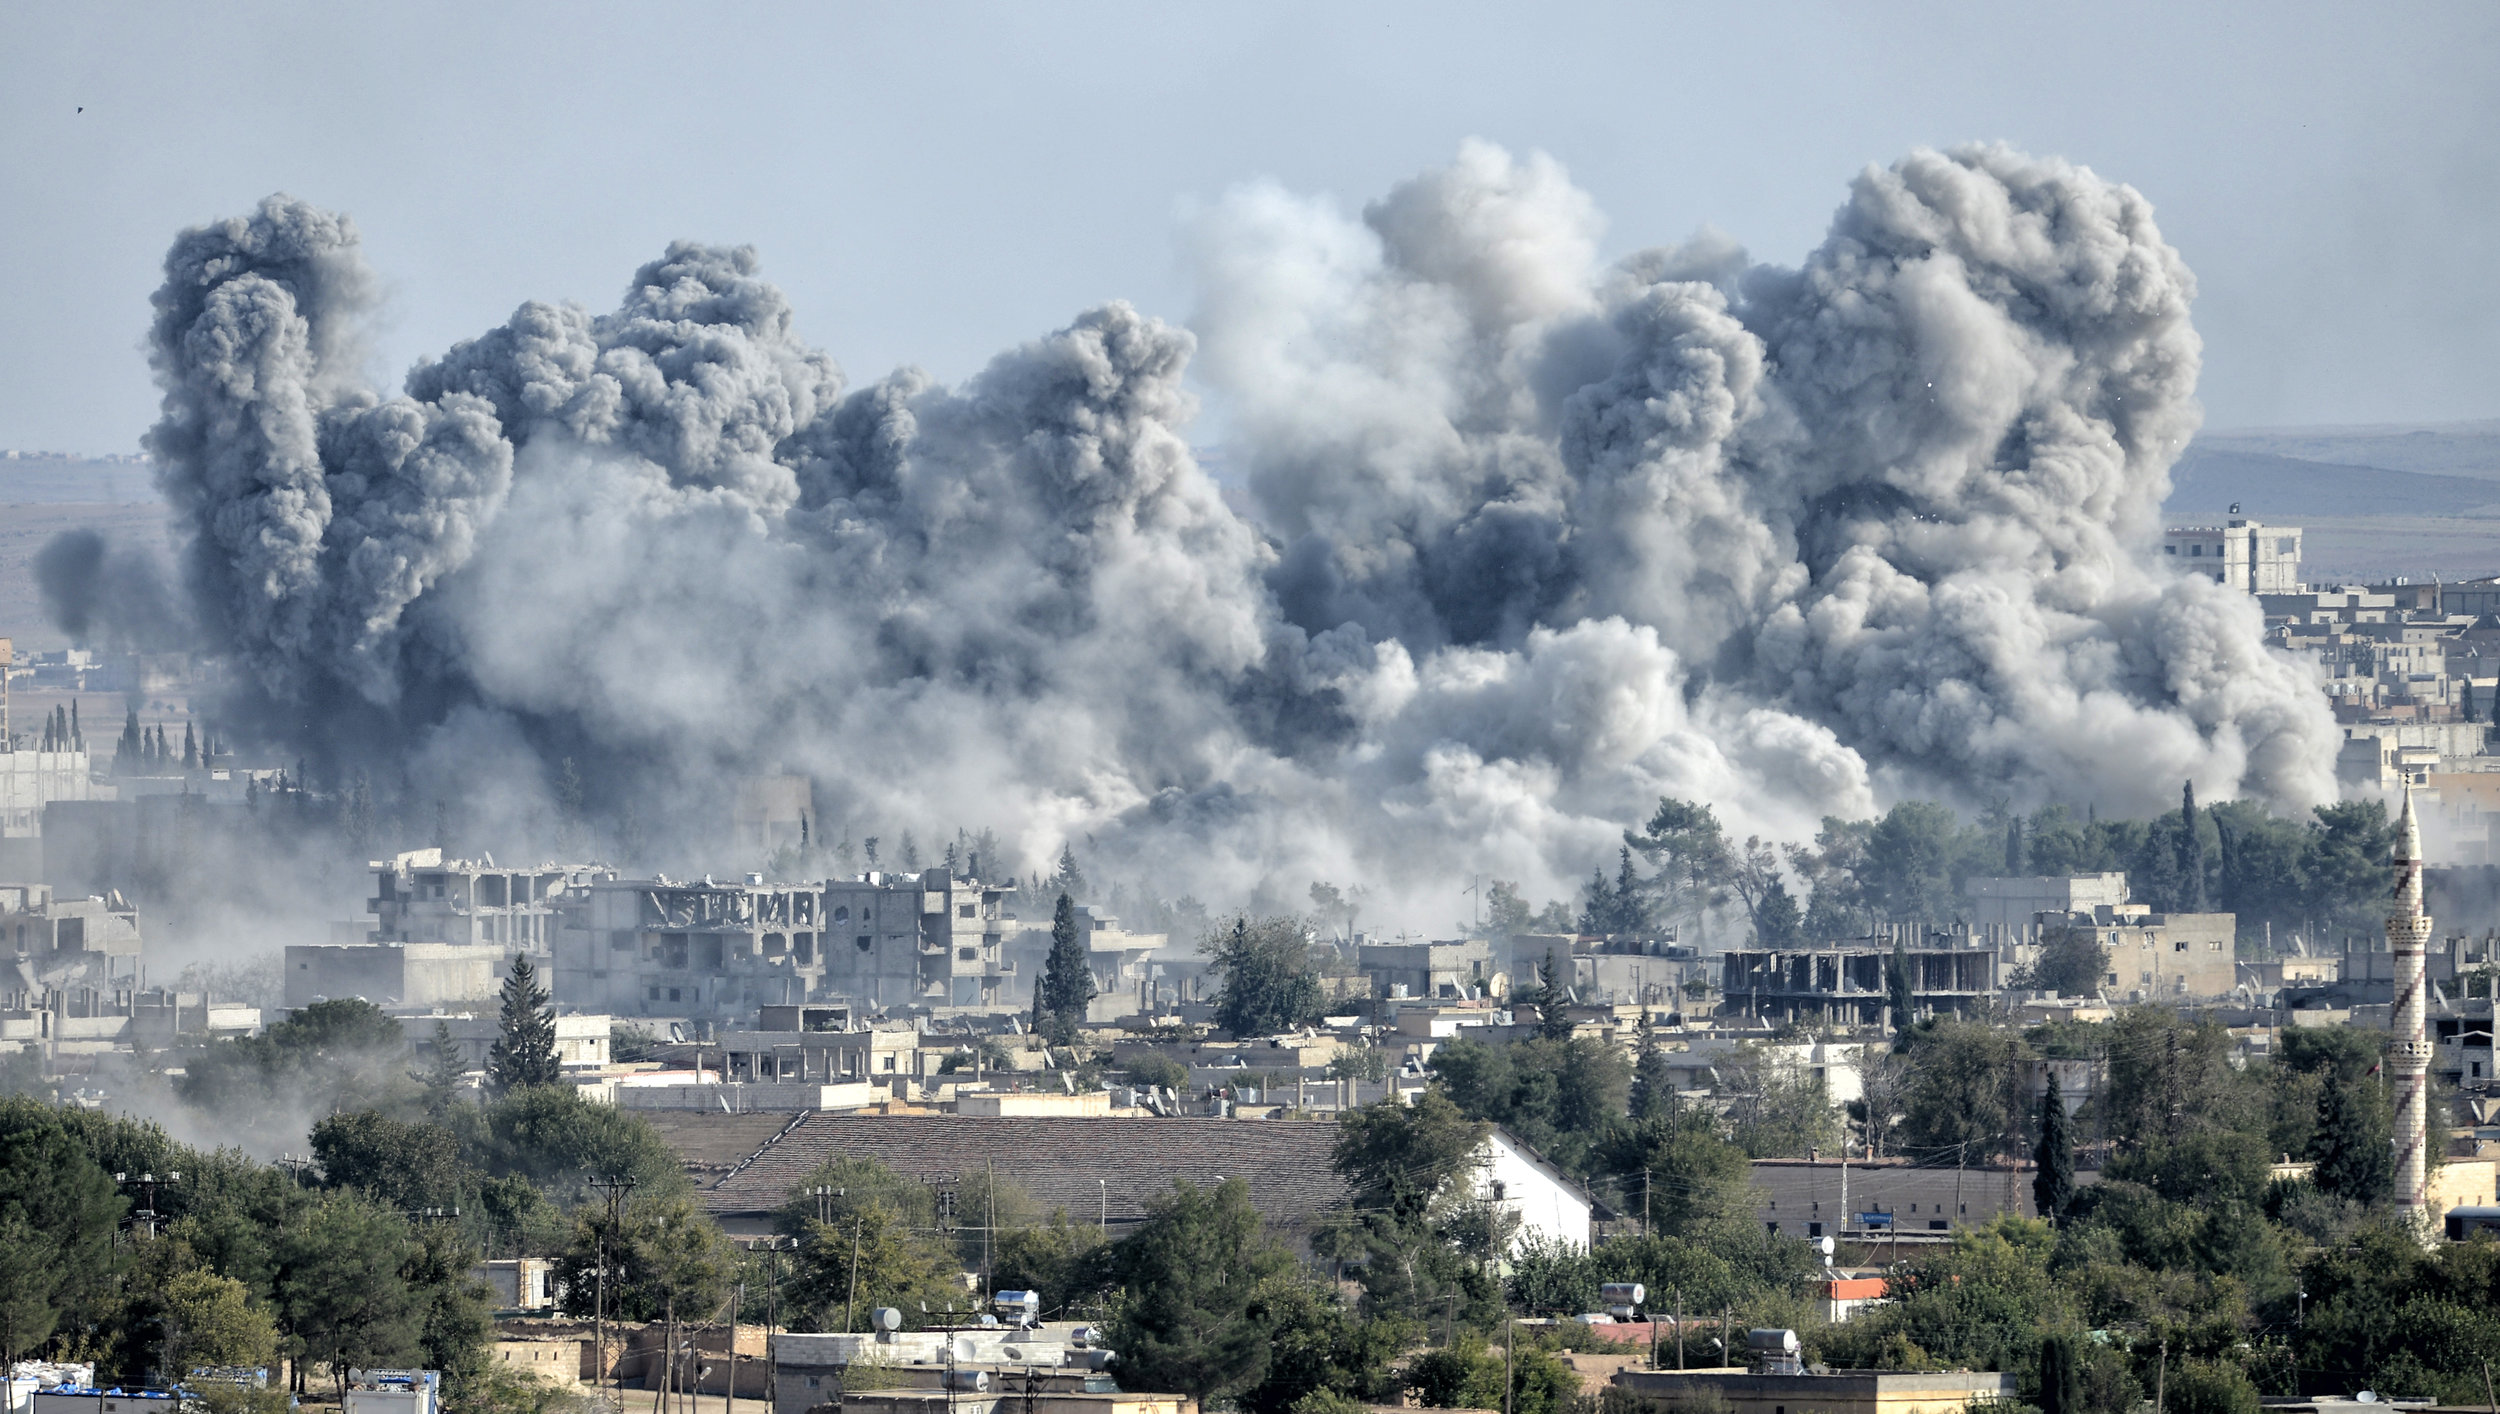 PICTURED: An explosion after an apparent US-led coalition airstrike on Kobane, Syria, as seen from the Turkish side of the border. Credit Orlok.